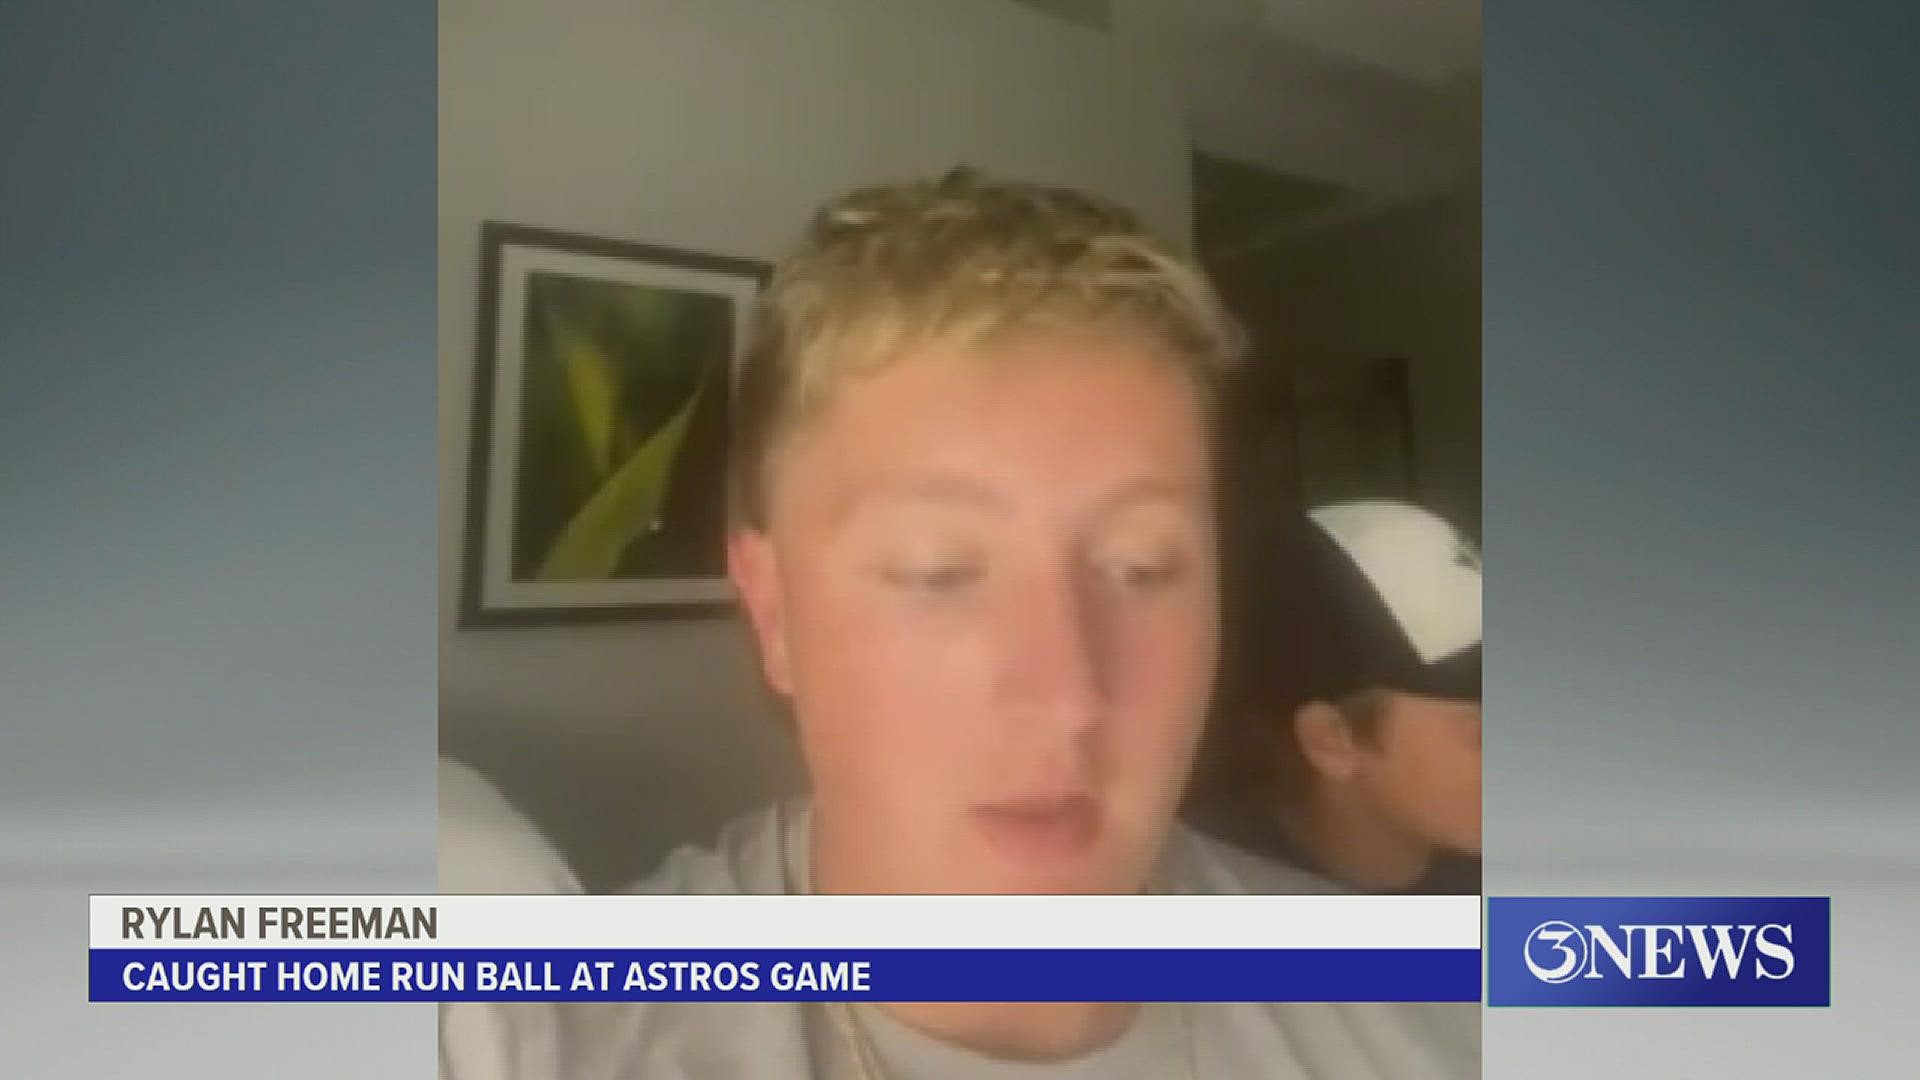 Rylan Freeman won a state title with London eight days ago and tonight got to appear on national TV on ESPN after exchanging the ball for Astros gear and tickets.